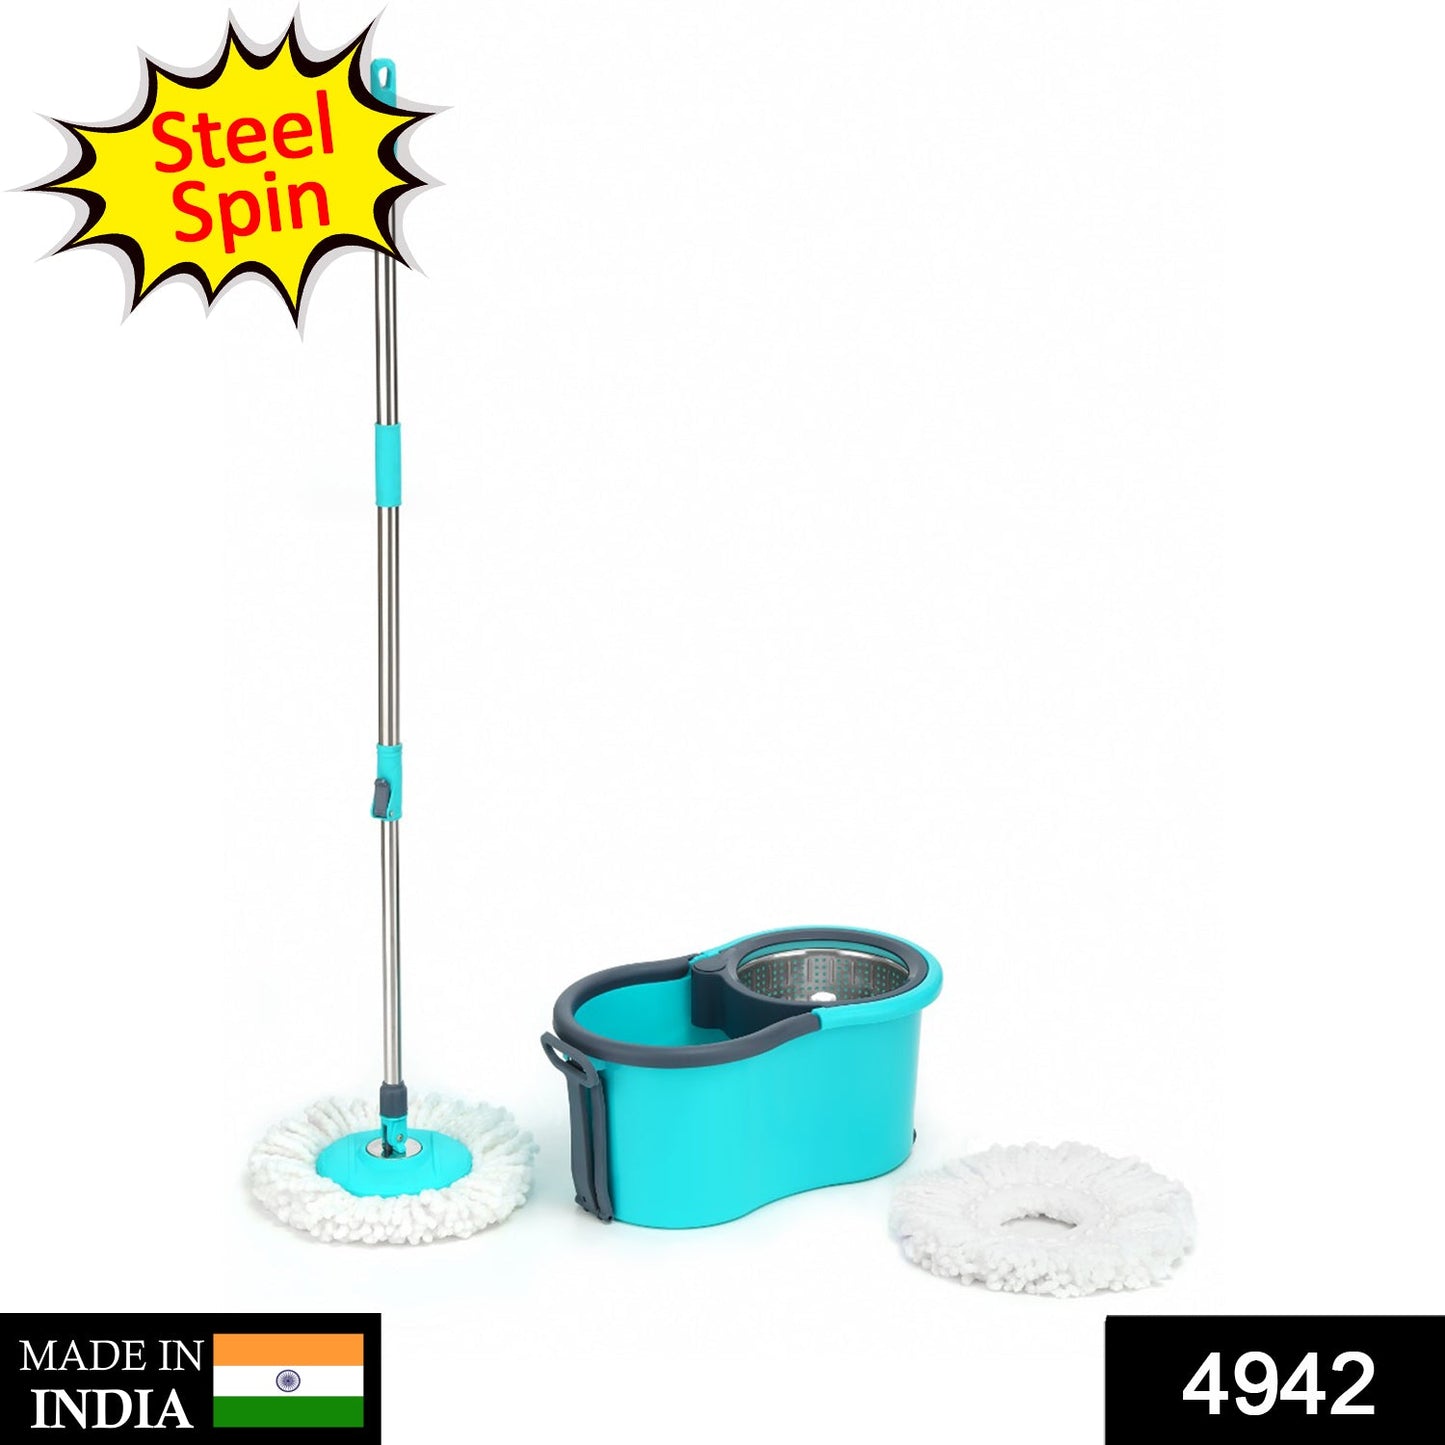 4942 Quick Spin Mop With Steel Spin, Bucket Floor Cleaning, Easy Wheels & Big Bucket, Floor Cleaning Mop with Bucket - SWASTIK CREATIONS The Trend Point SWASTIK CREATIONS The Trend Point